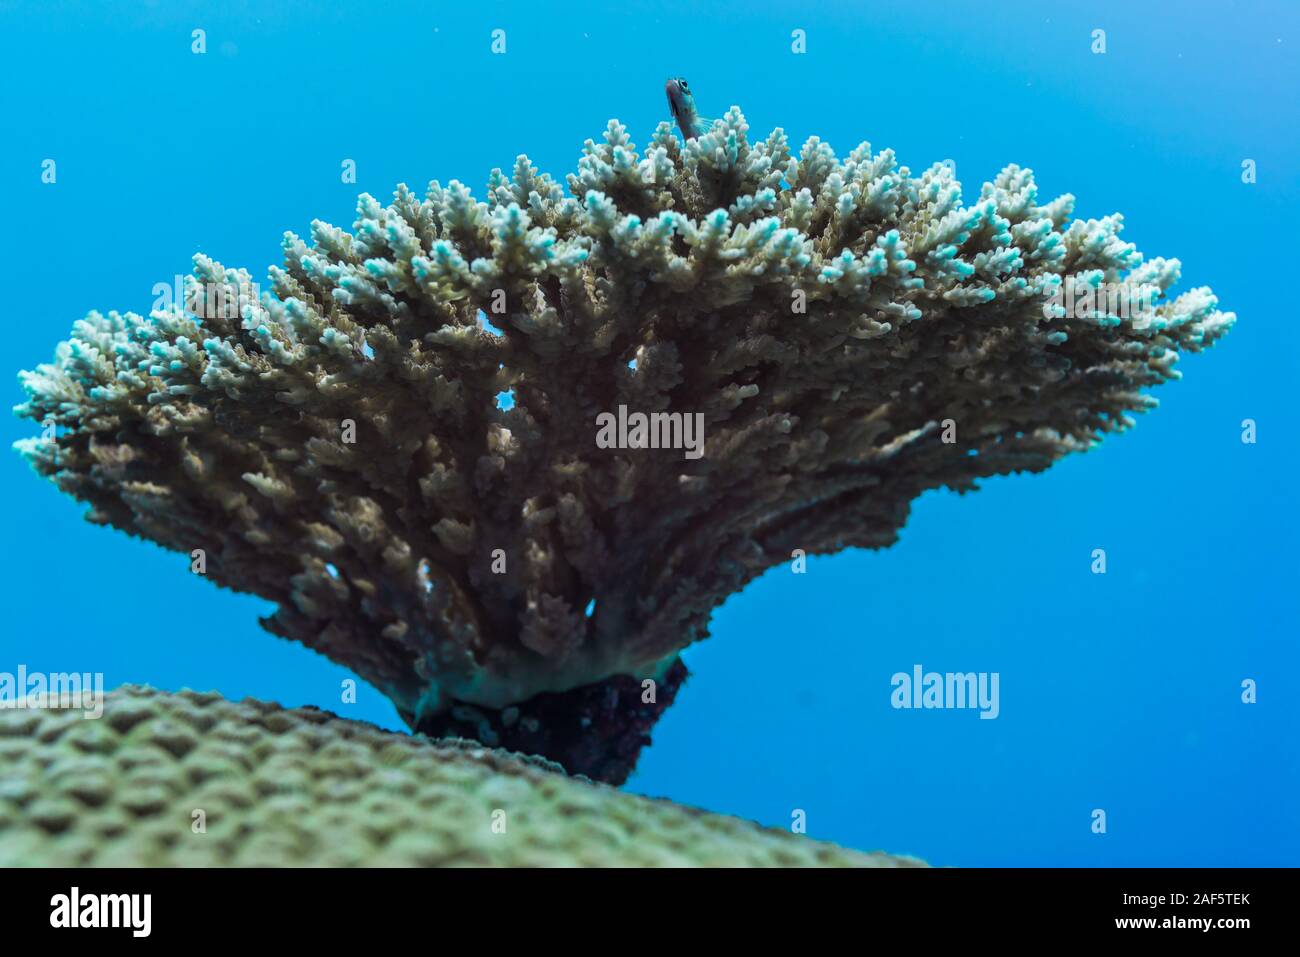 a small goby gazing blue world from the top of the tree-like shape coral Stock Photo